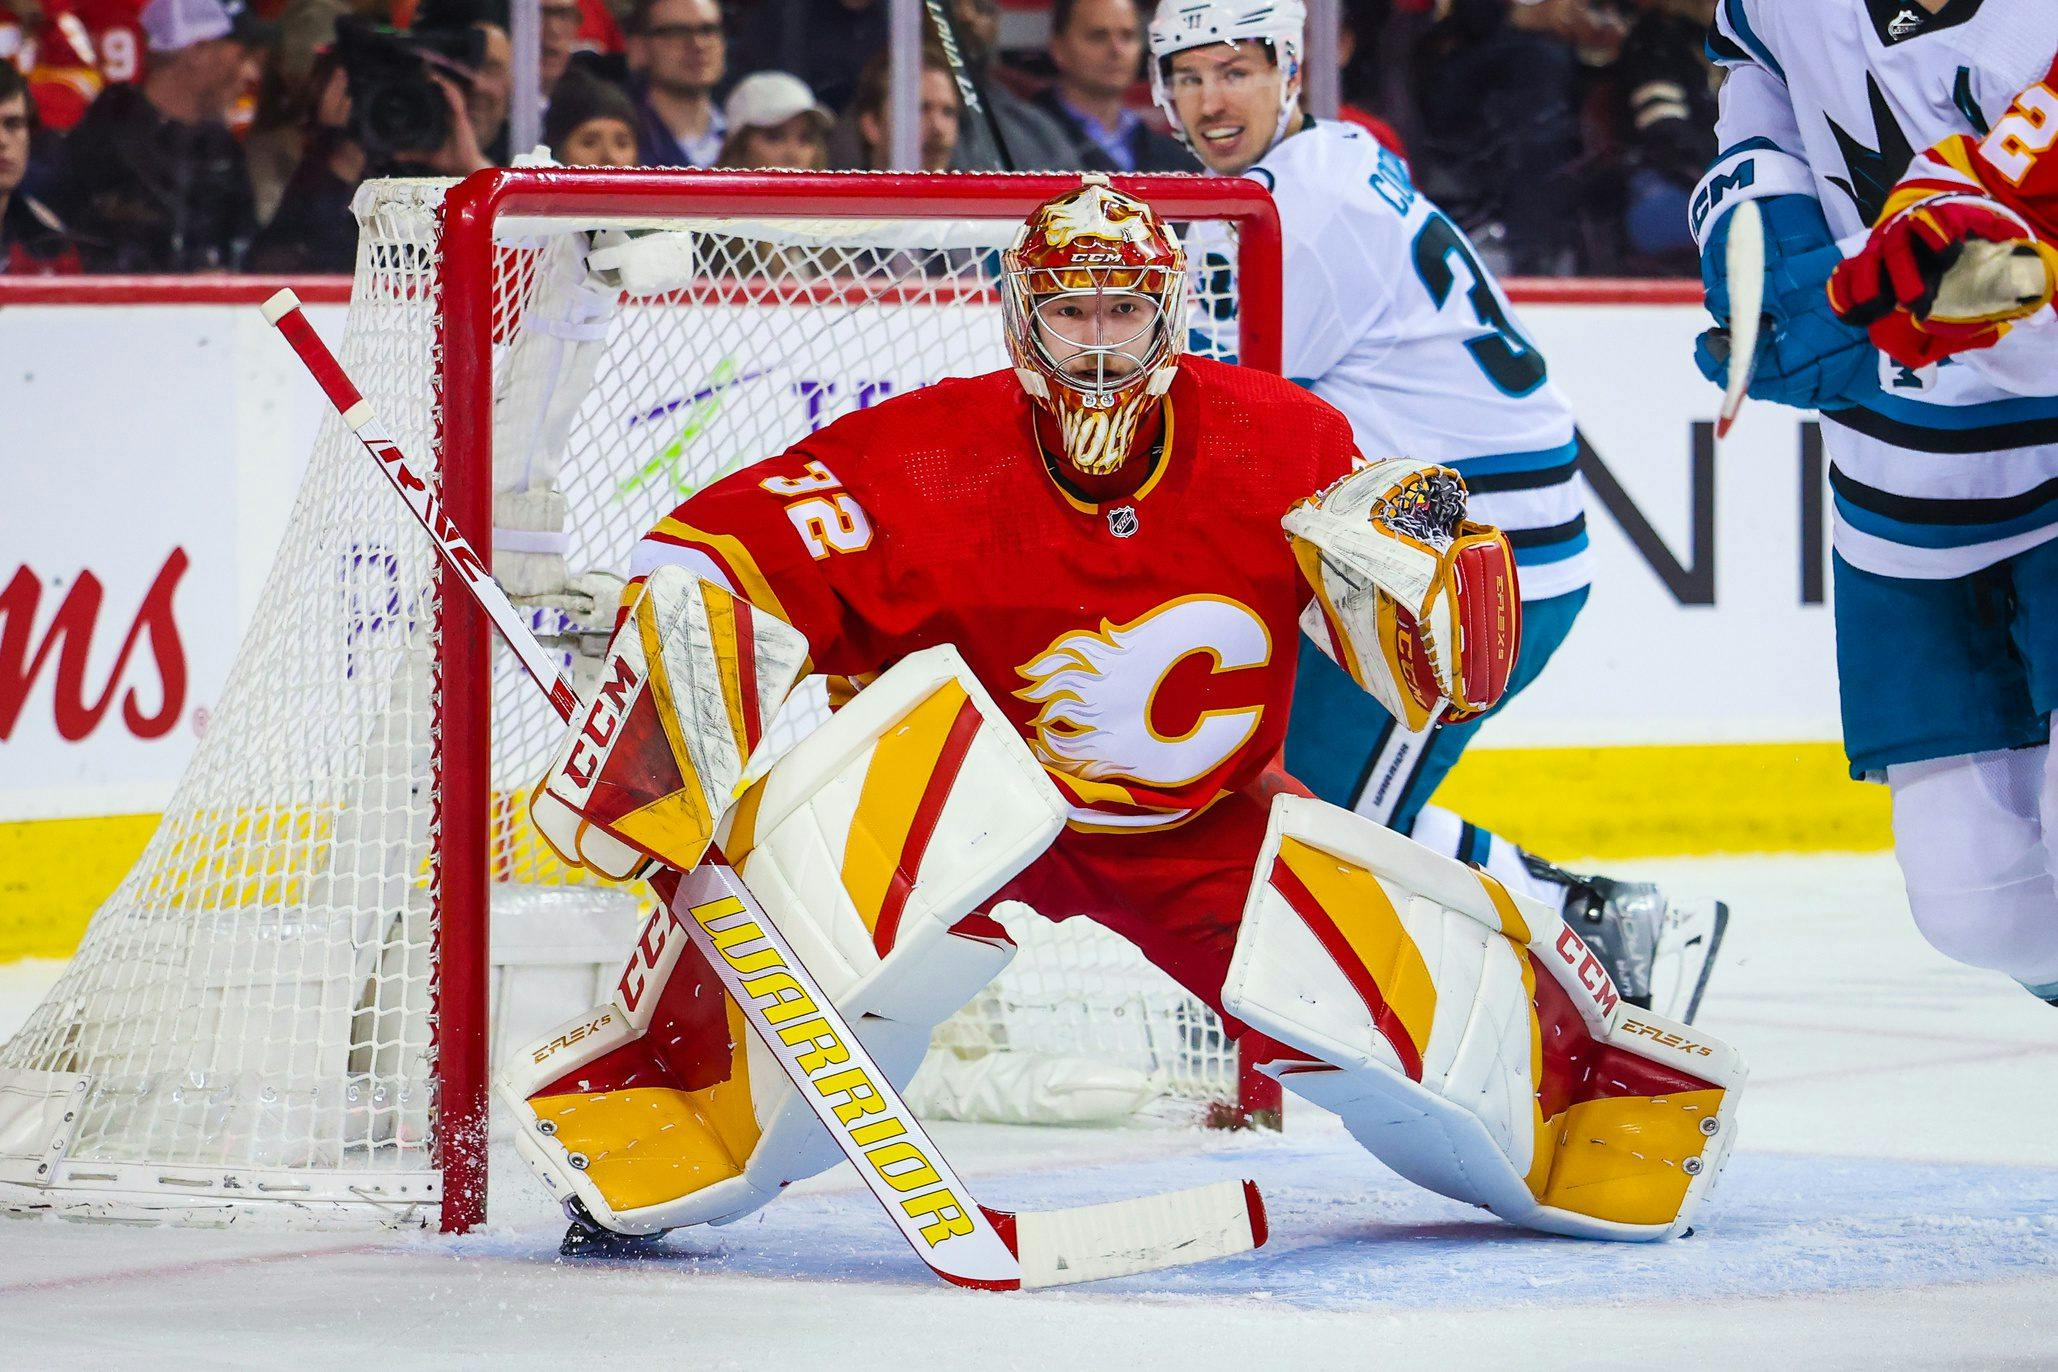 Priority is playing for Flames goalie prospect Dustin Wolf